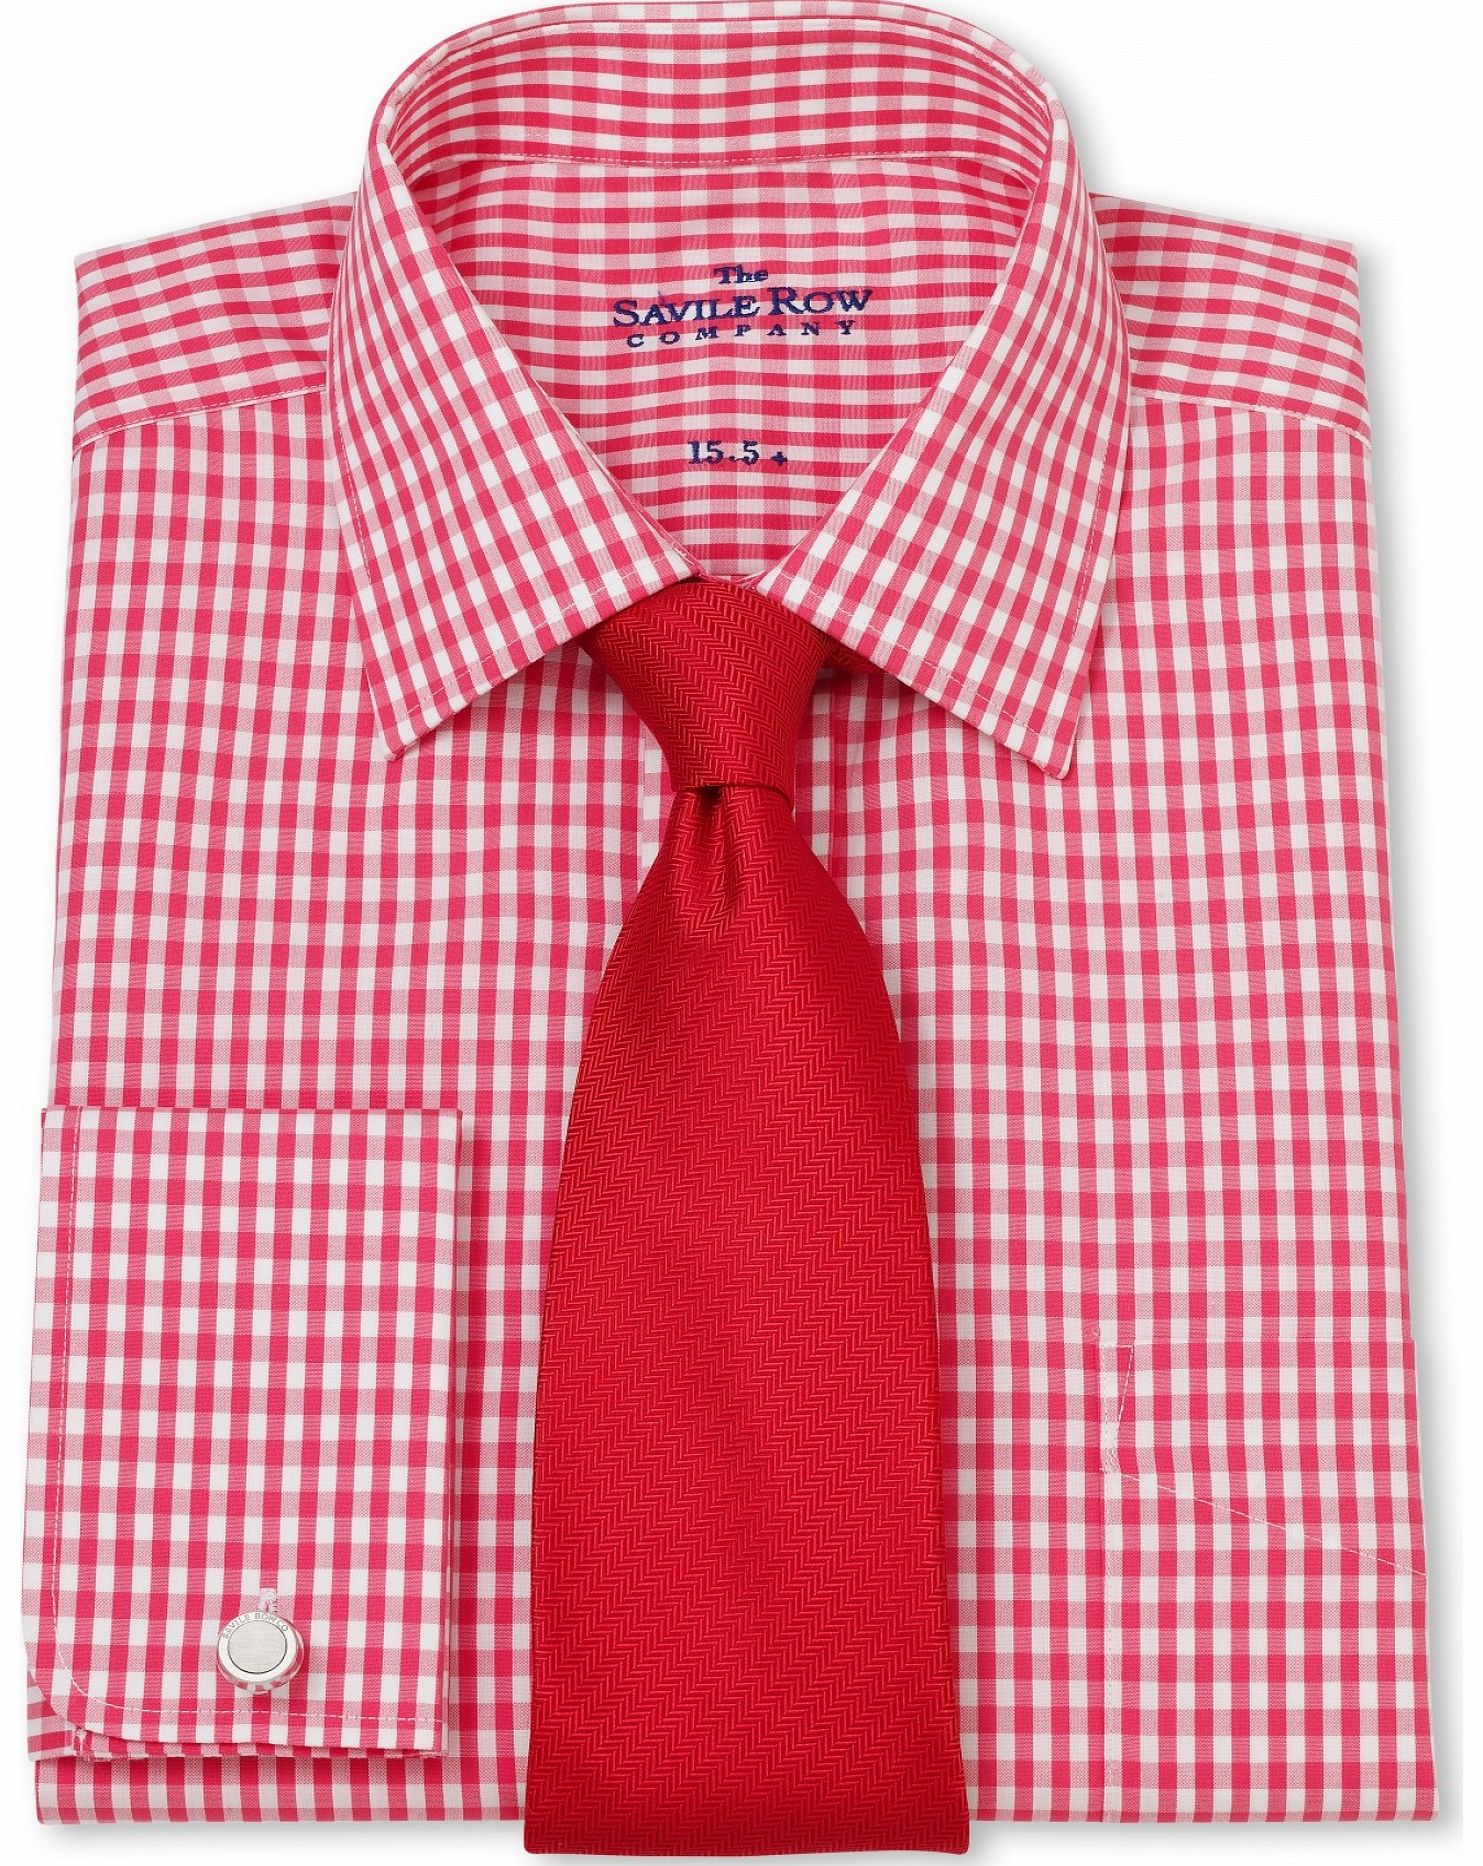 Savile Row Company Pink White Gingham Check Classic Fit Shirt 16